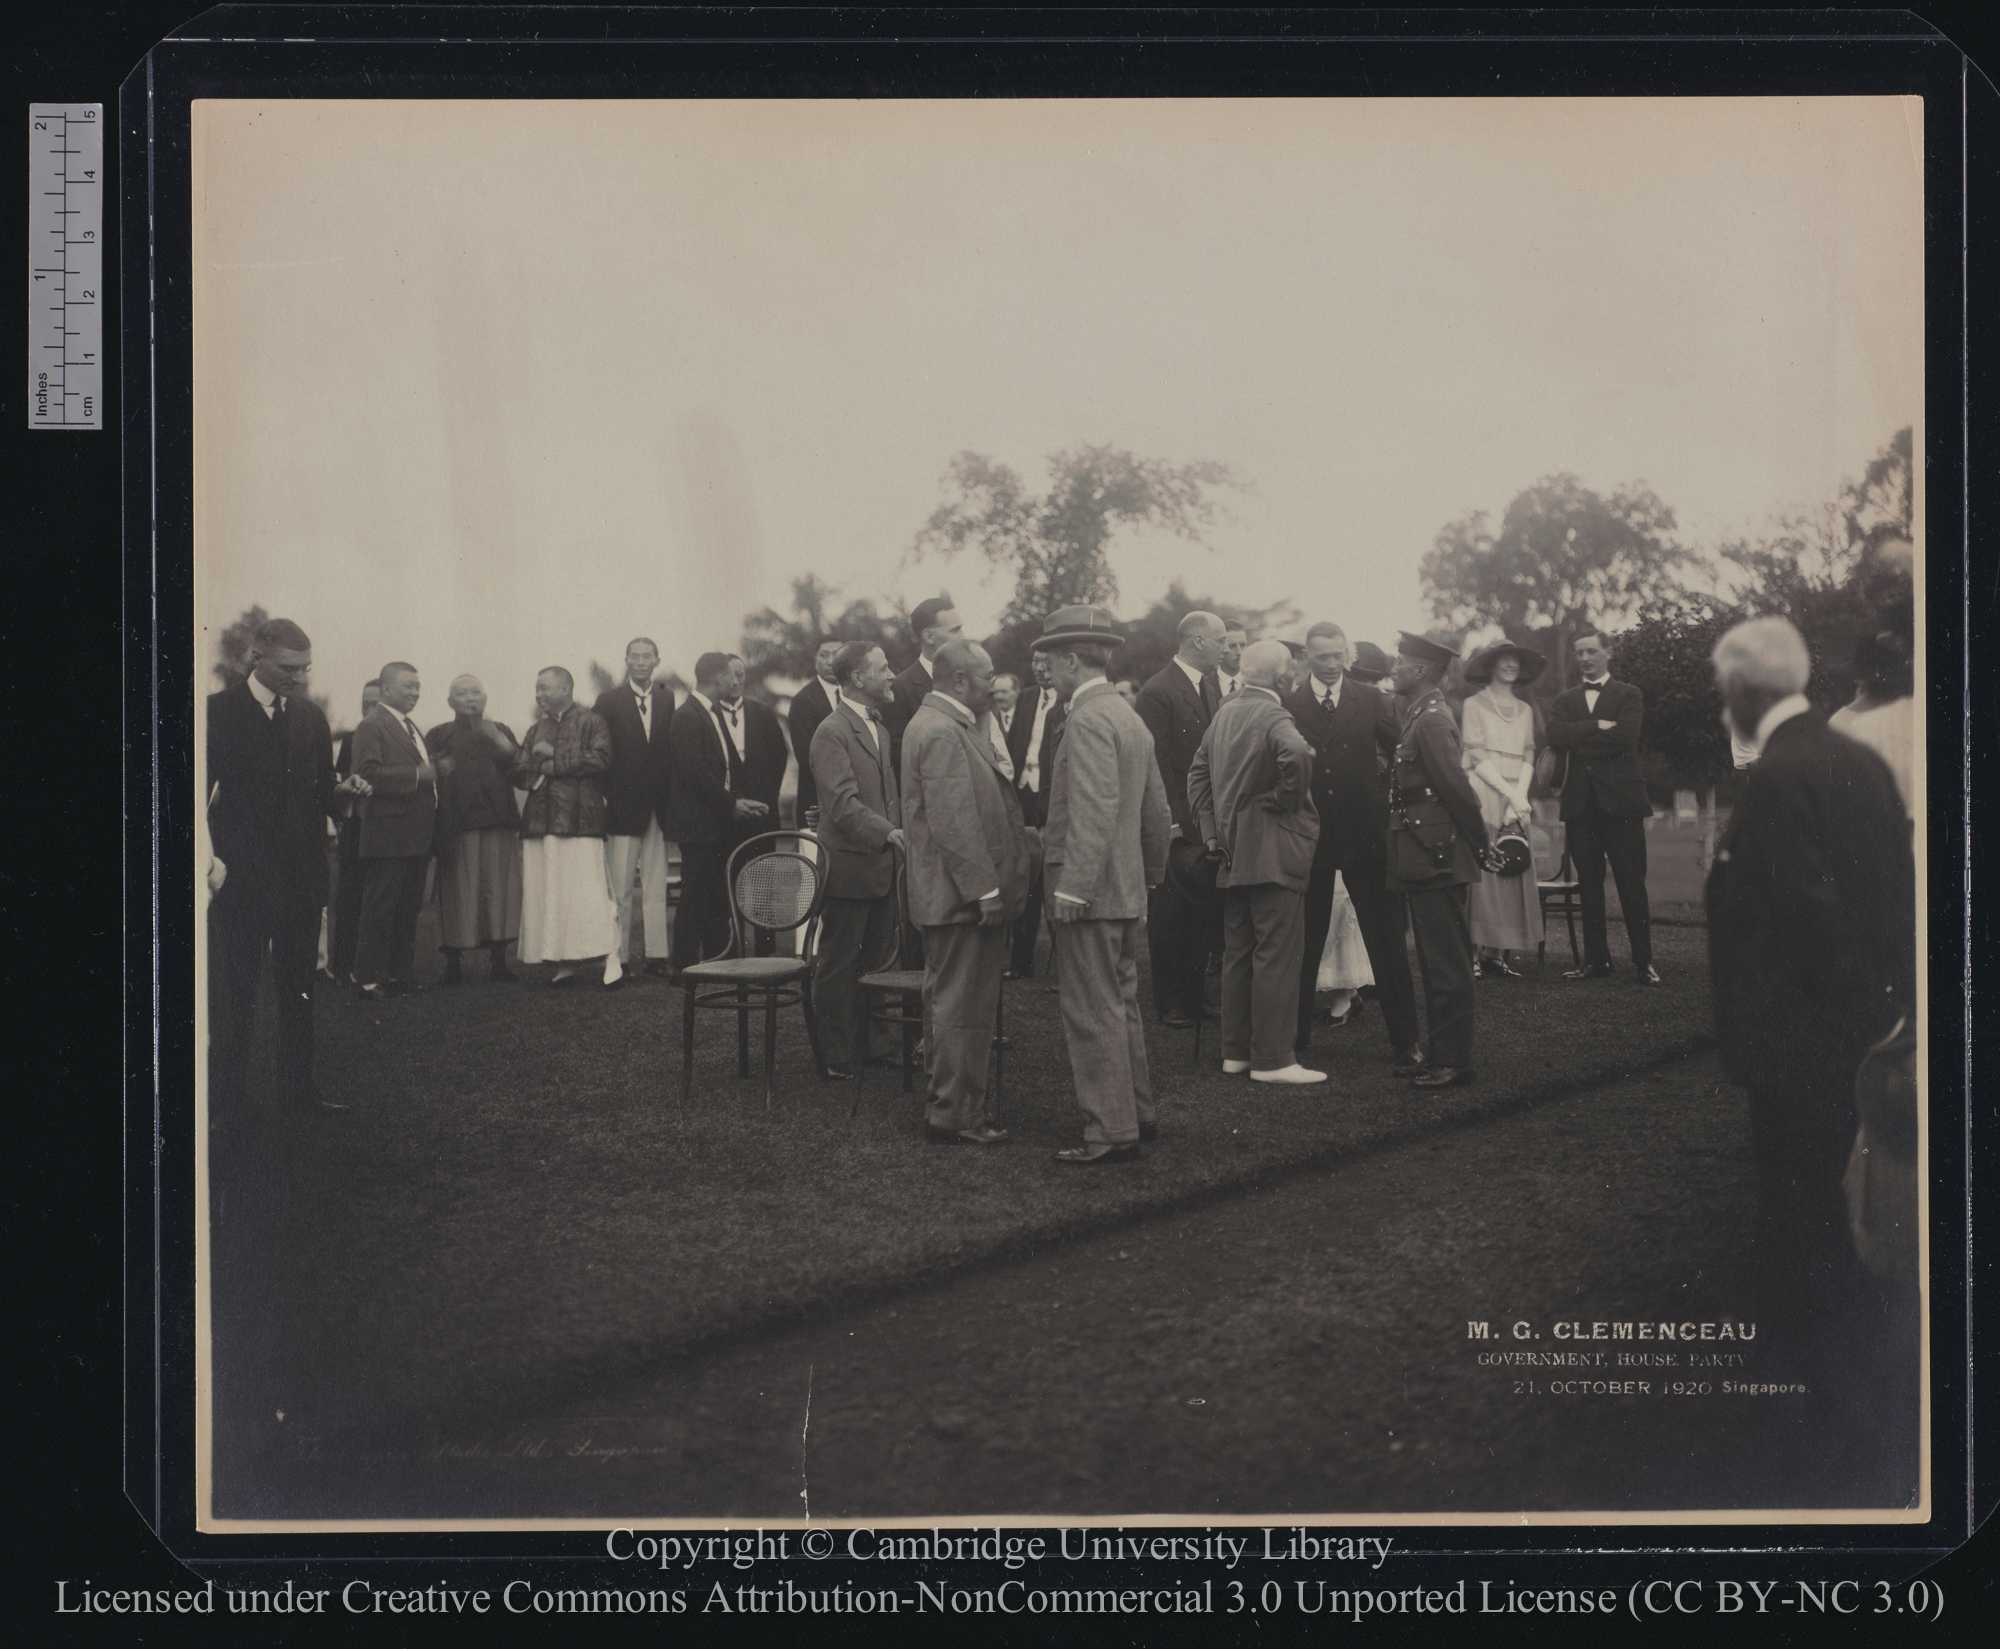 M.G. Clemenceau, Government House Party, Singapore, 21 October 1920, 1920-10-21